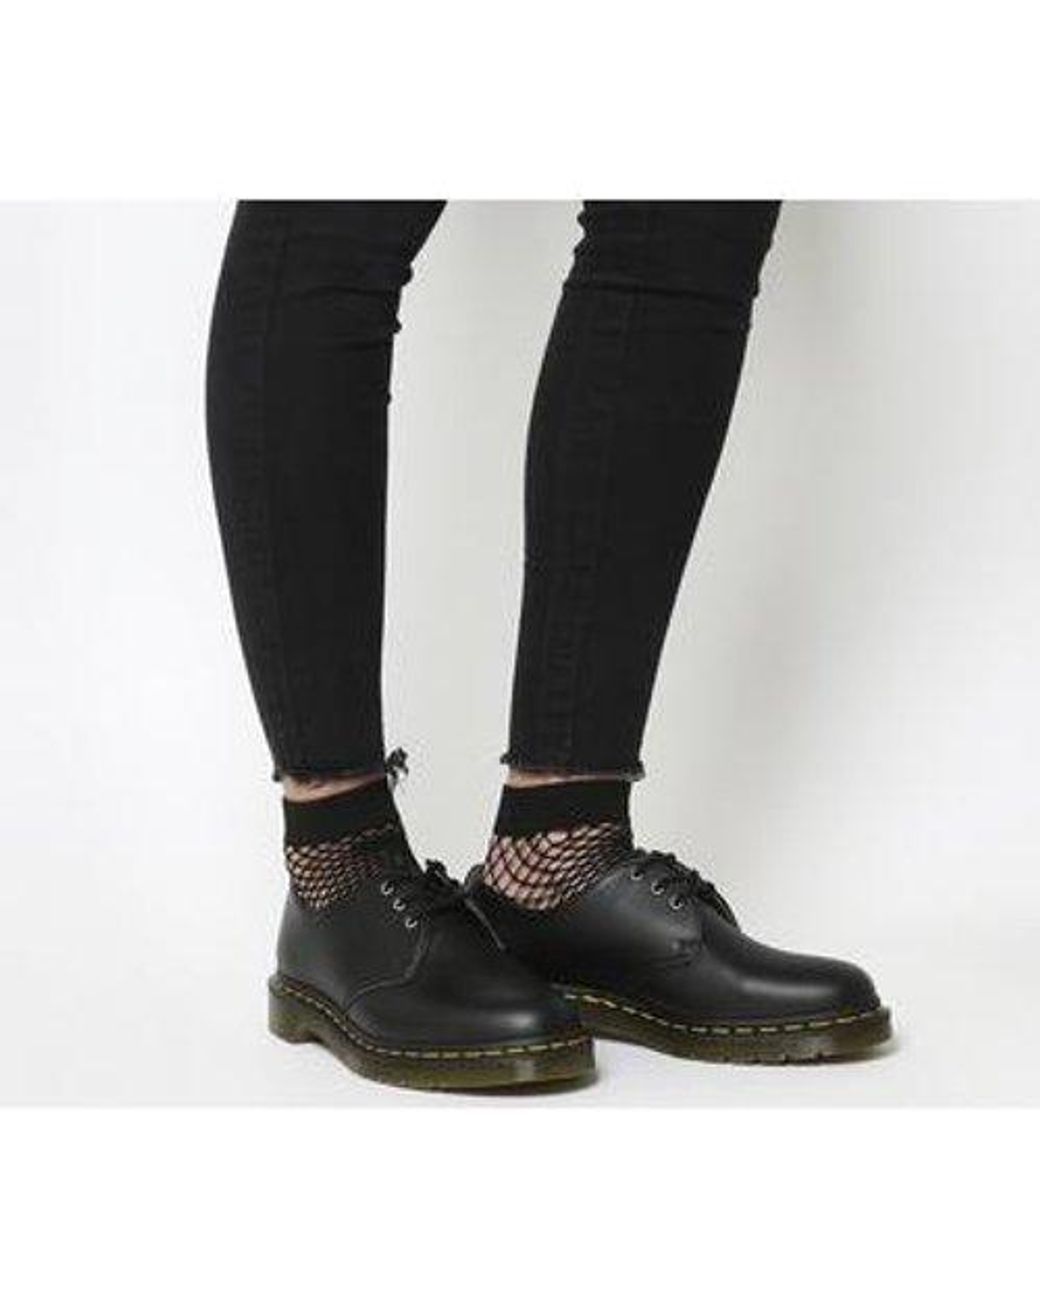 Dr. Martens Synthetic Vegan 1461 3 Eye Shoes F in Black - Lyst